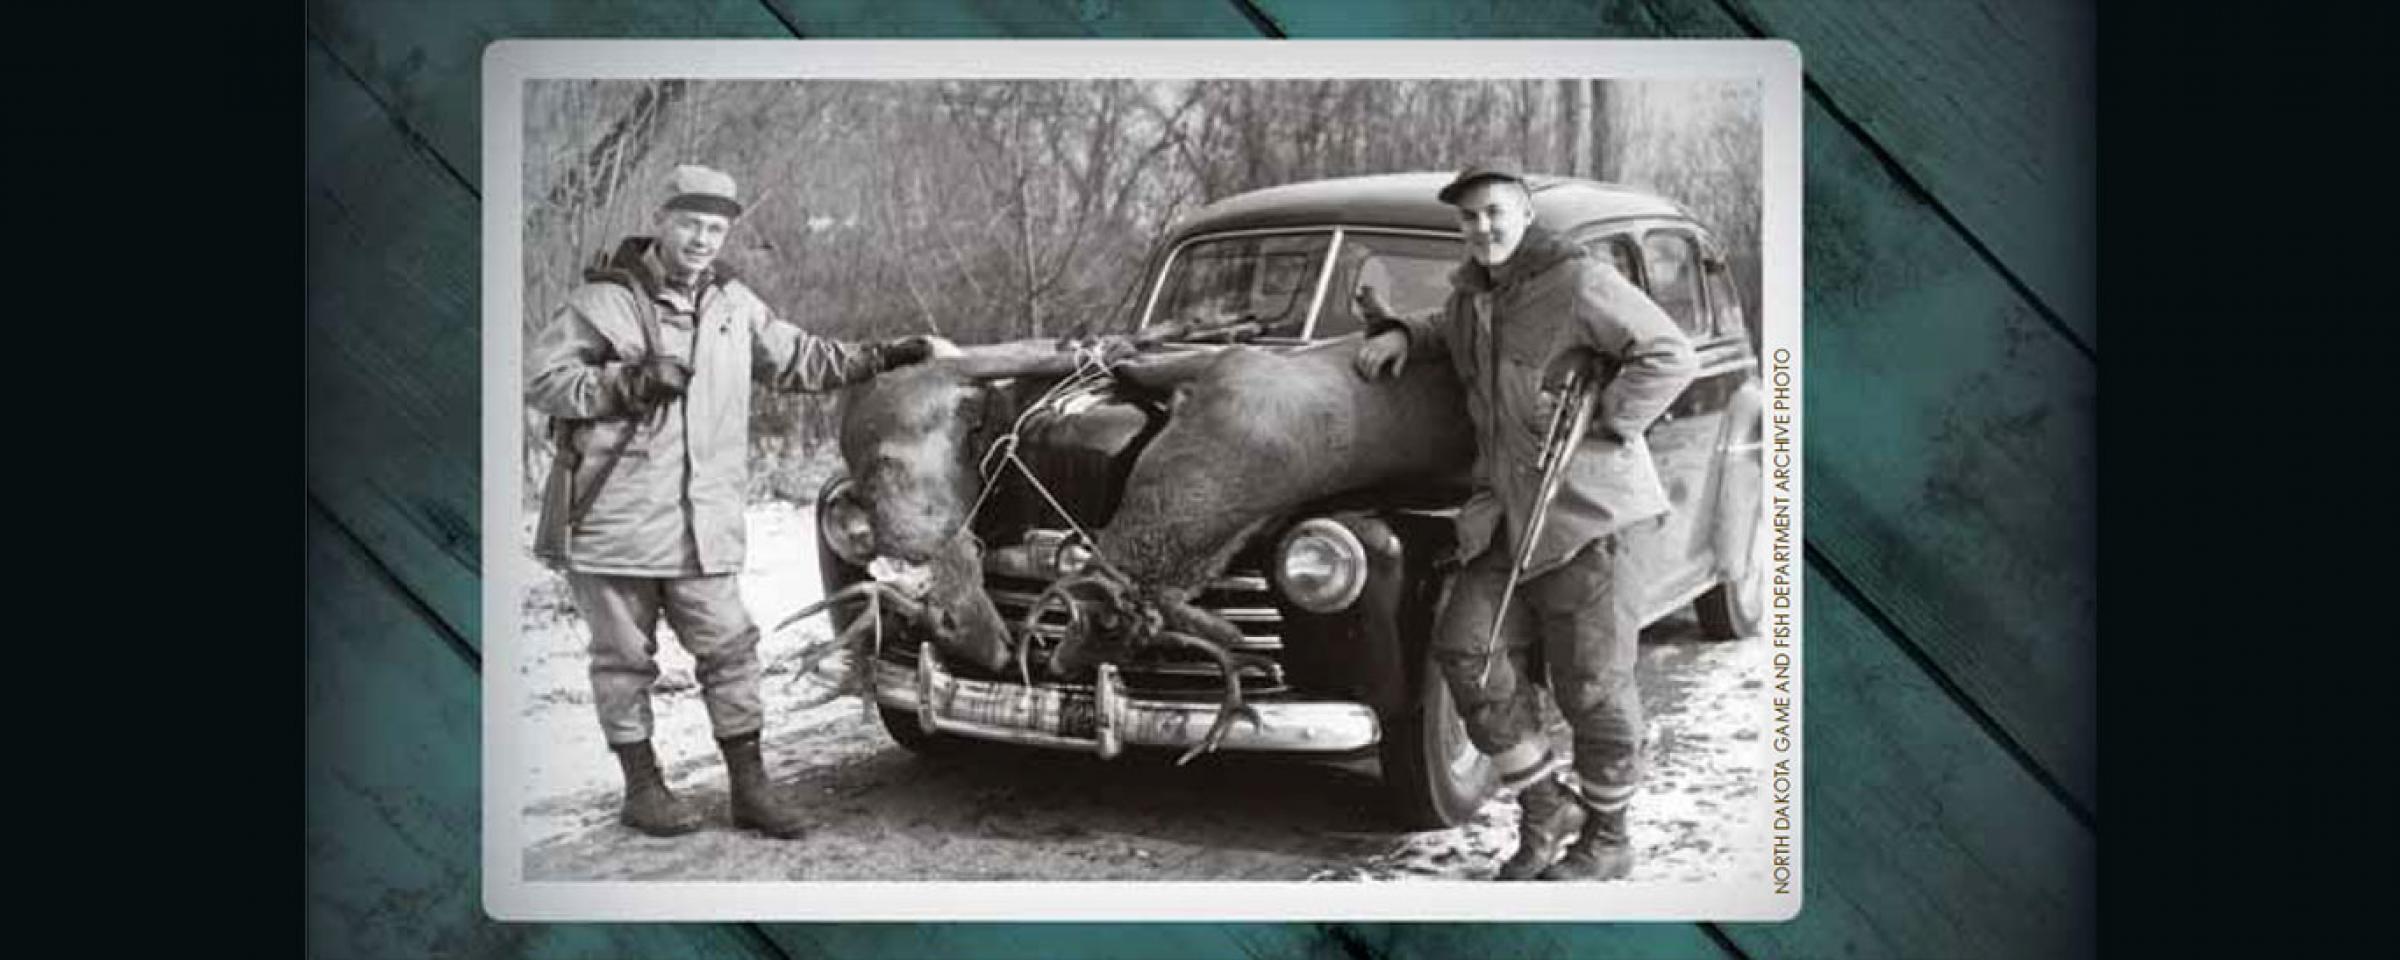 1954 photo of hunters with deer carcasses tied to hood of car